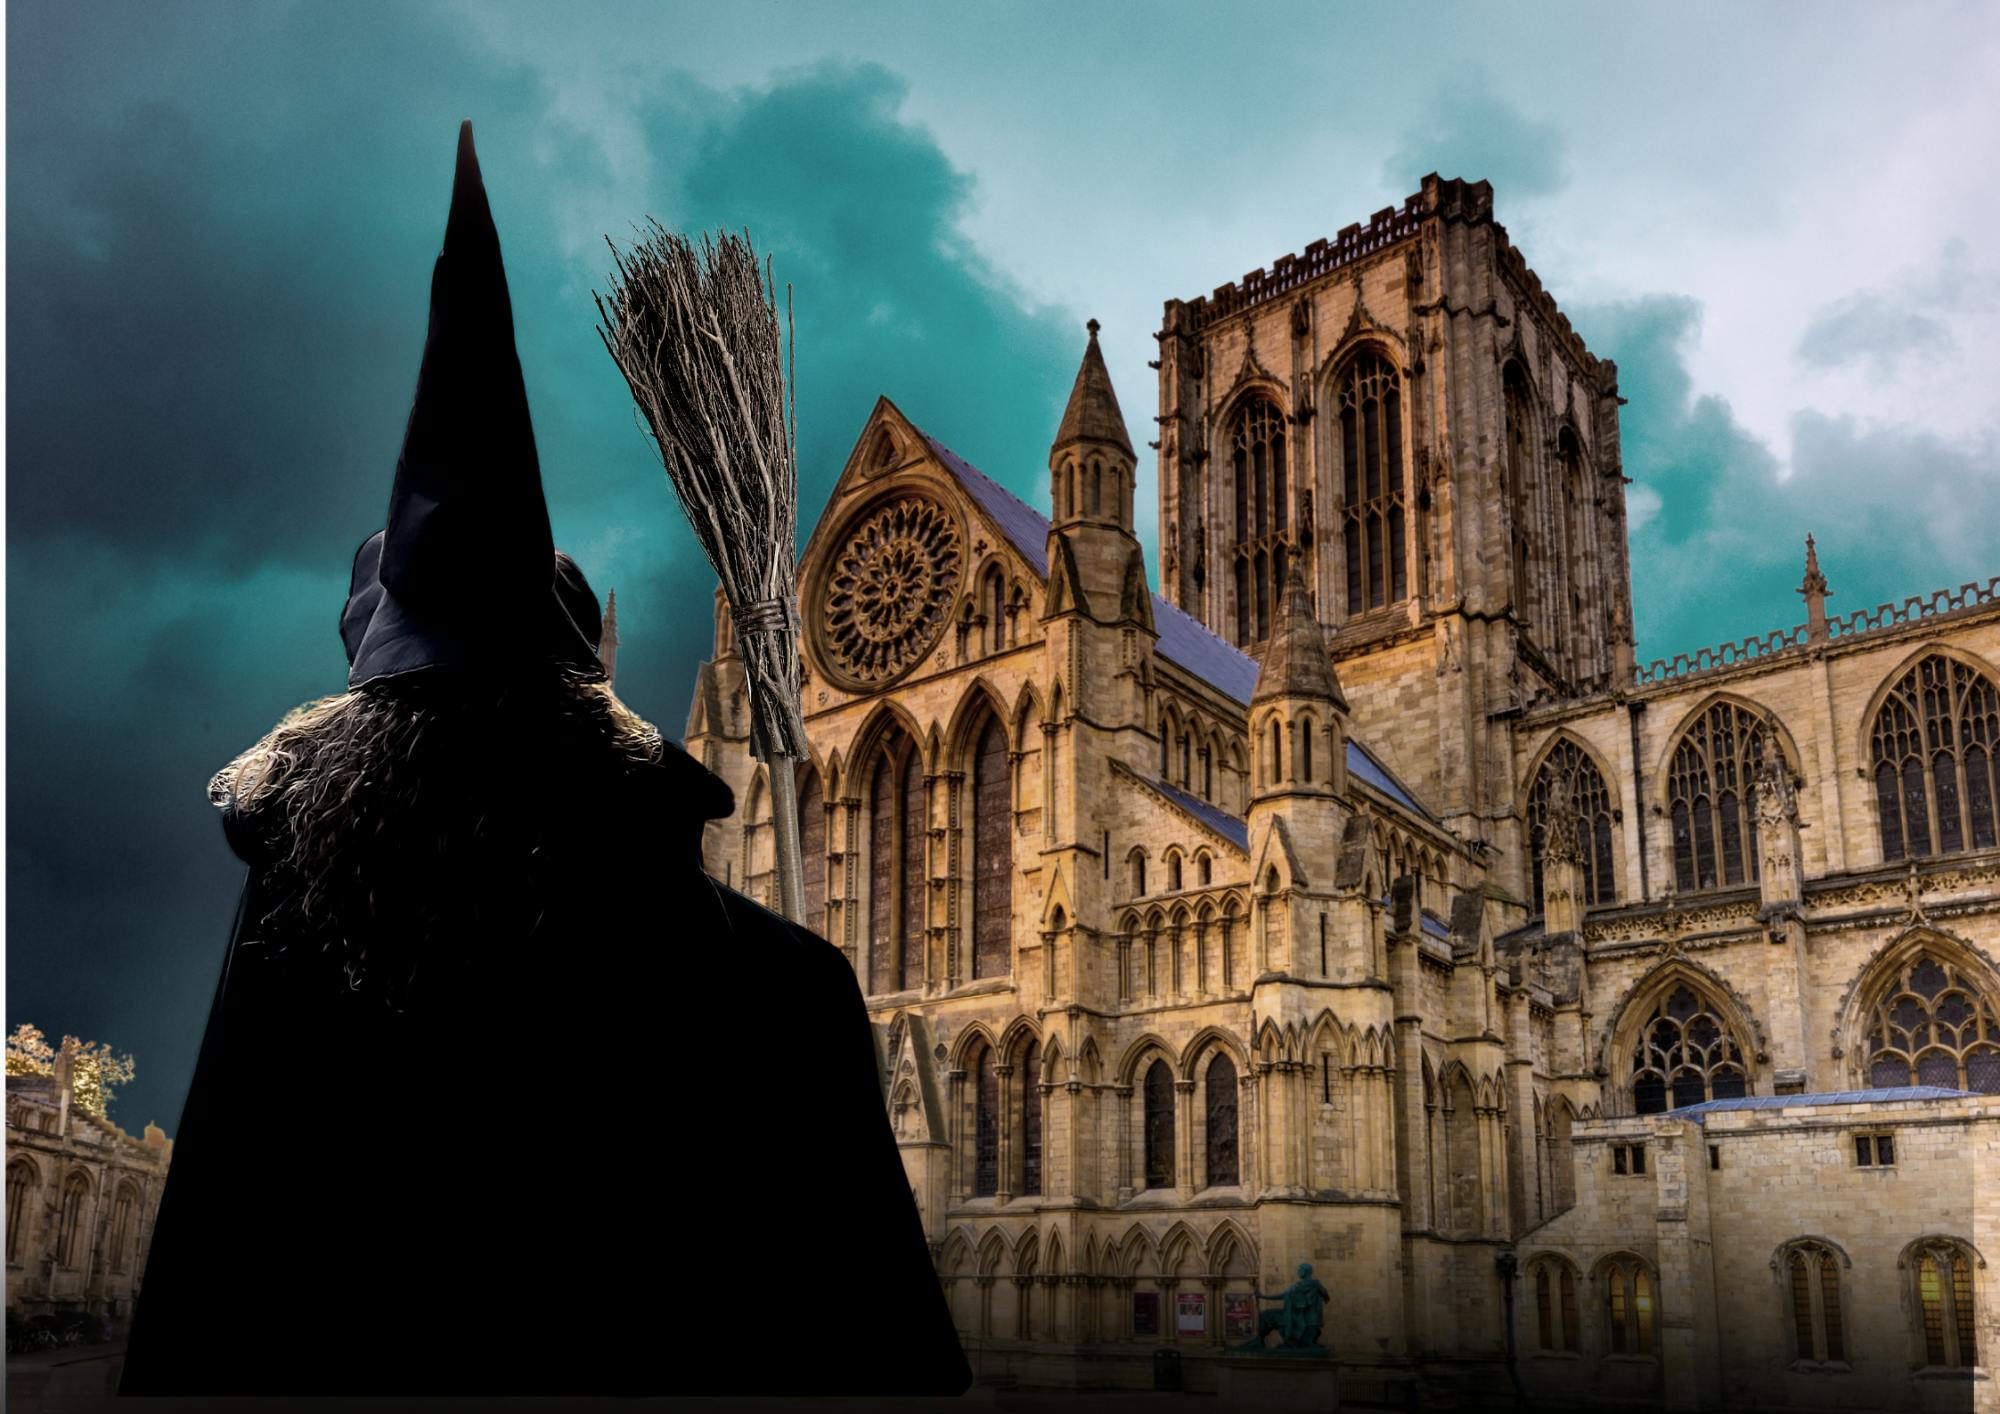 York witches and history walking tour